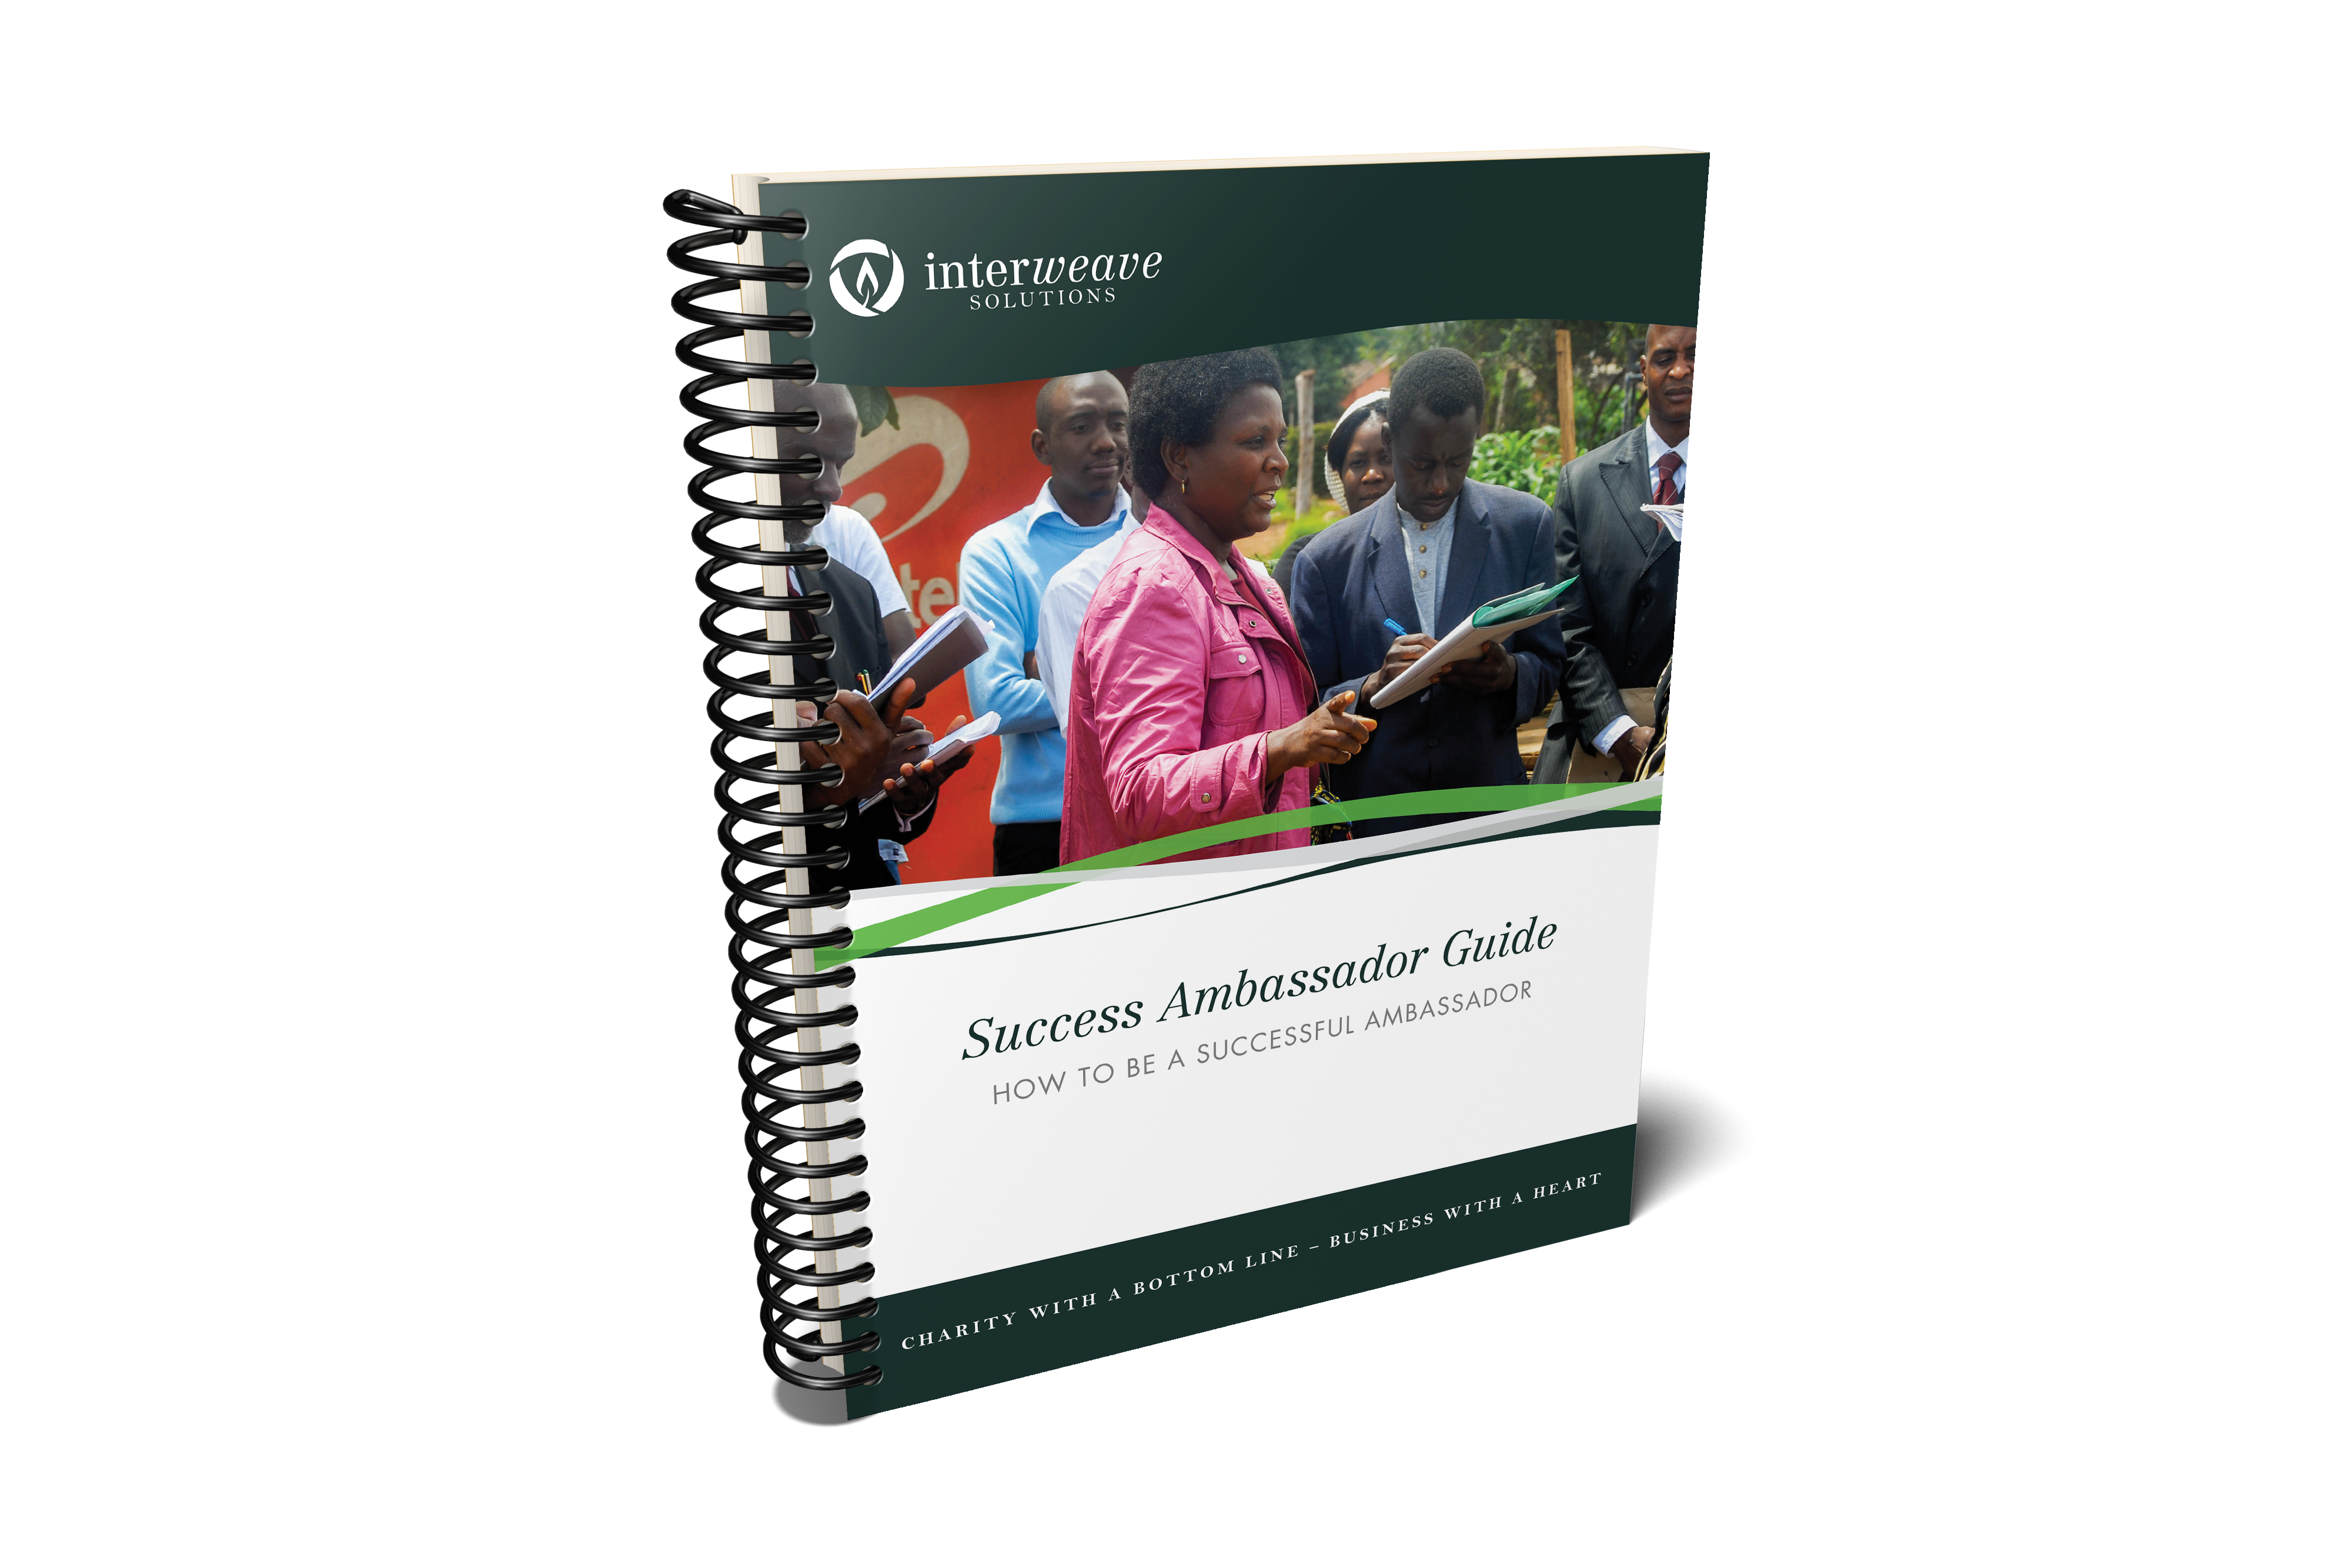 To download the Success Ambassador Guide, please click here: Success Ambassador Guide